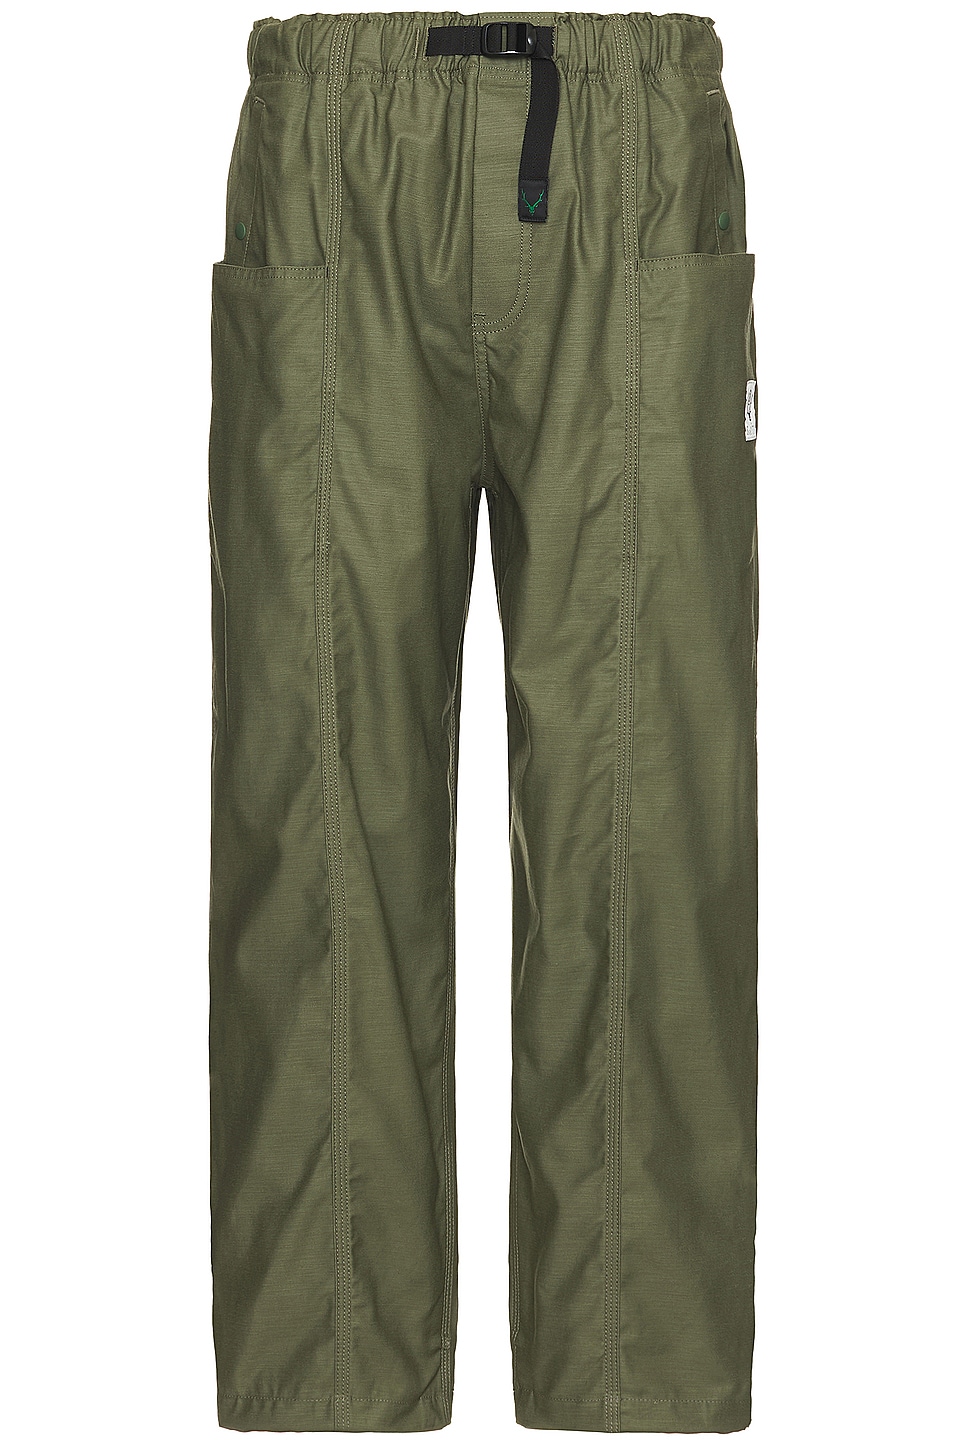 Image 1 of South2 West8 Belted Cs Pant Cotton Back Sateen in A-Olive